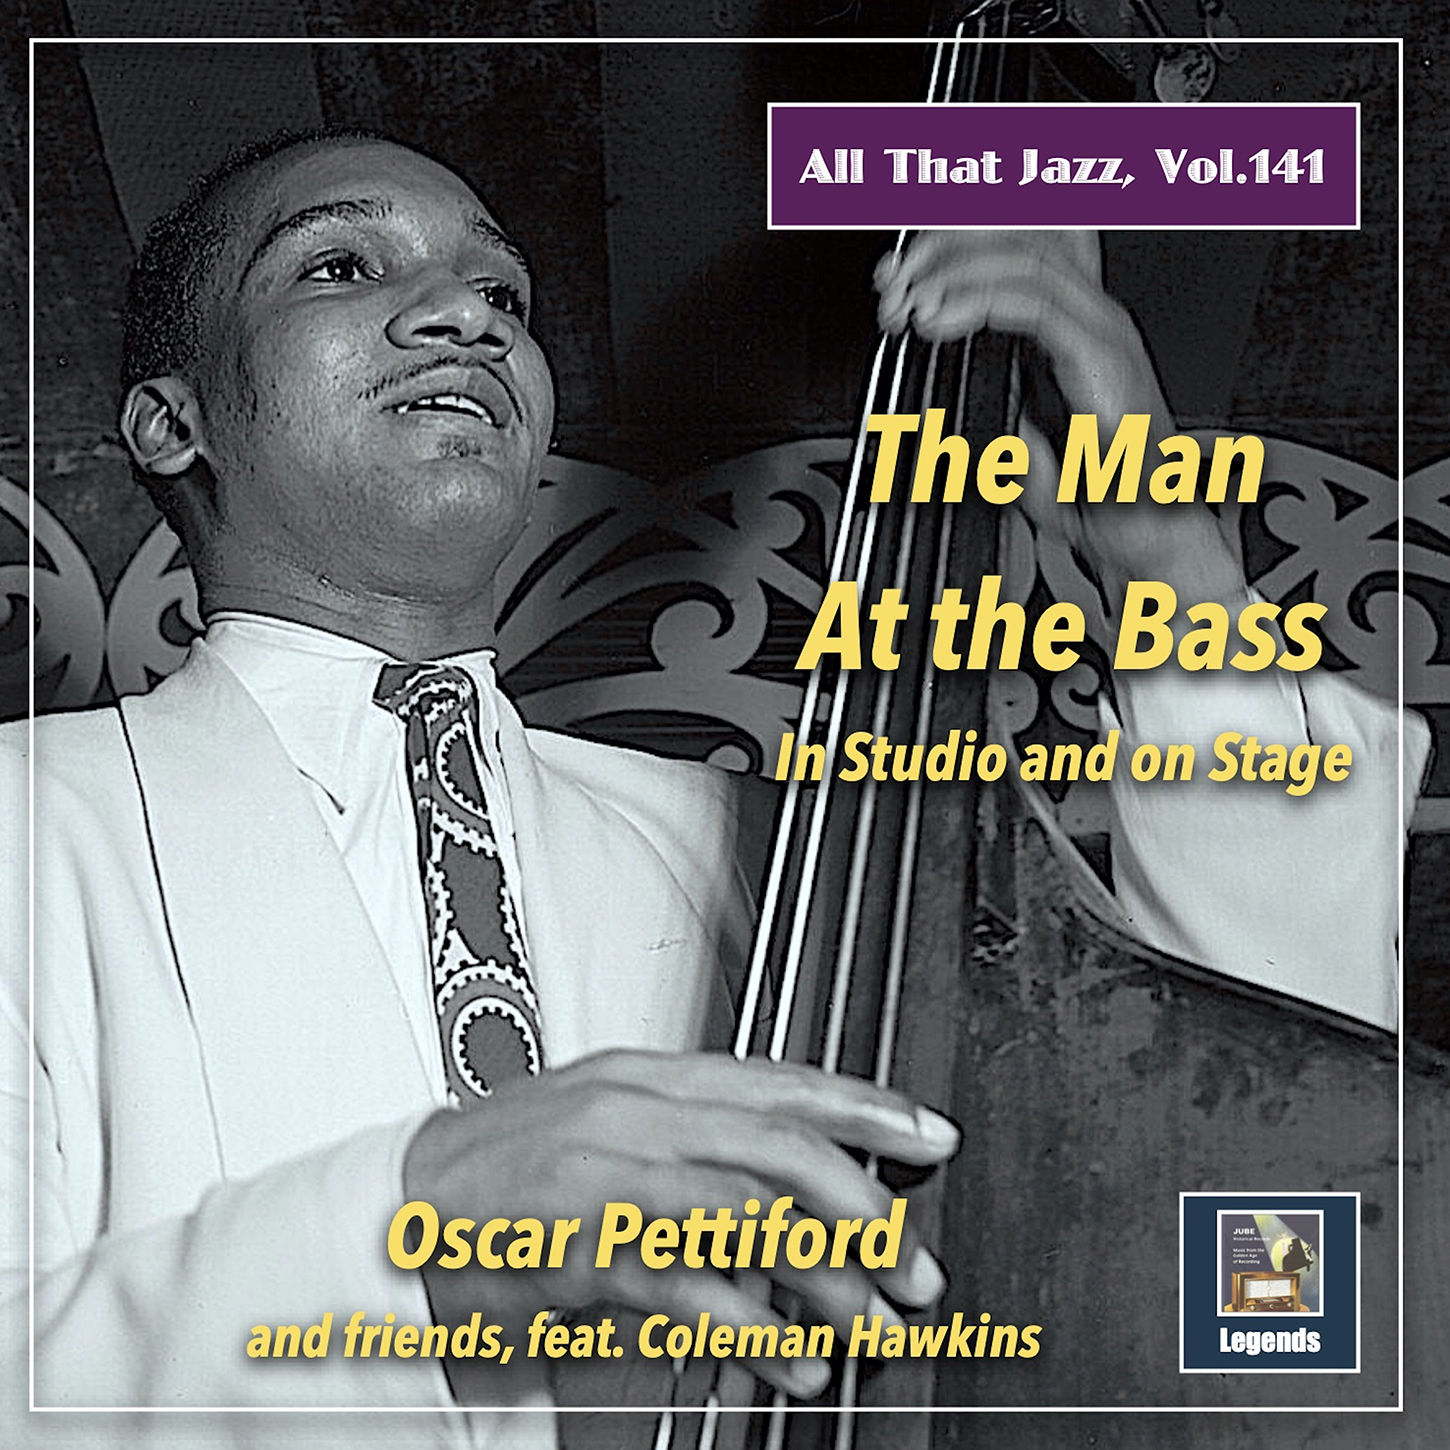 Oscar Pettiford Quartet - All That Jazz Vol. 141: The Man at the Bass in Studio and on Stage (2021) [FLAC 24bit/48kHz]